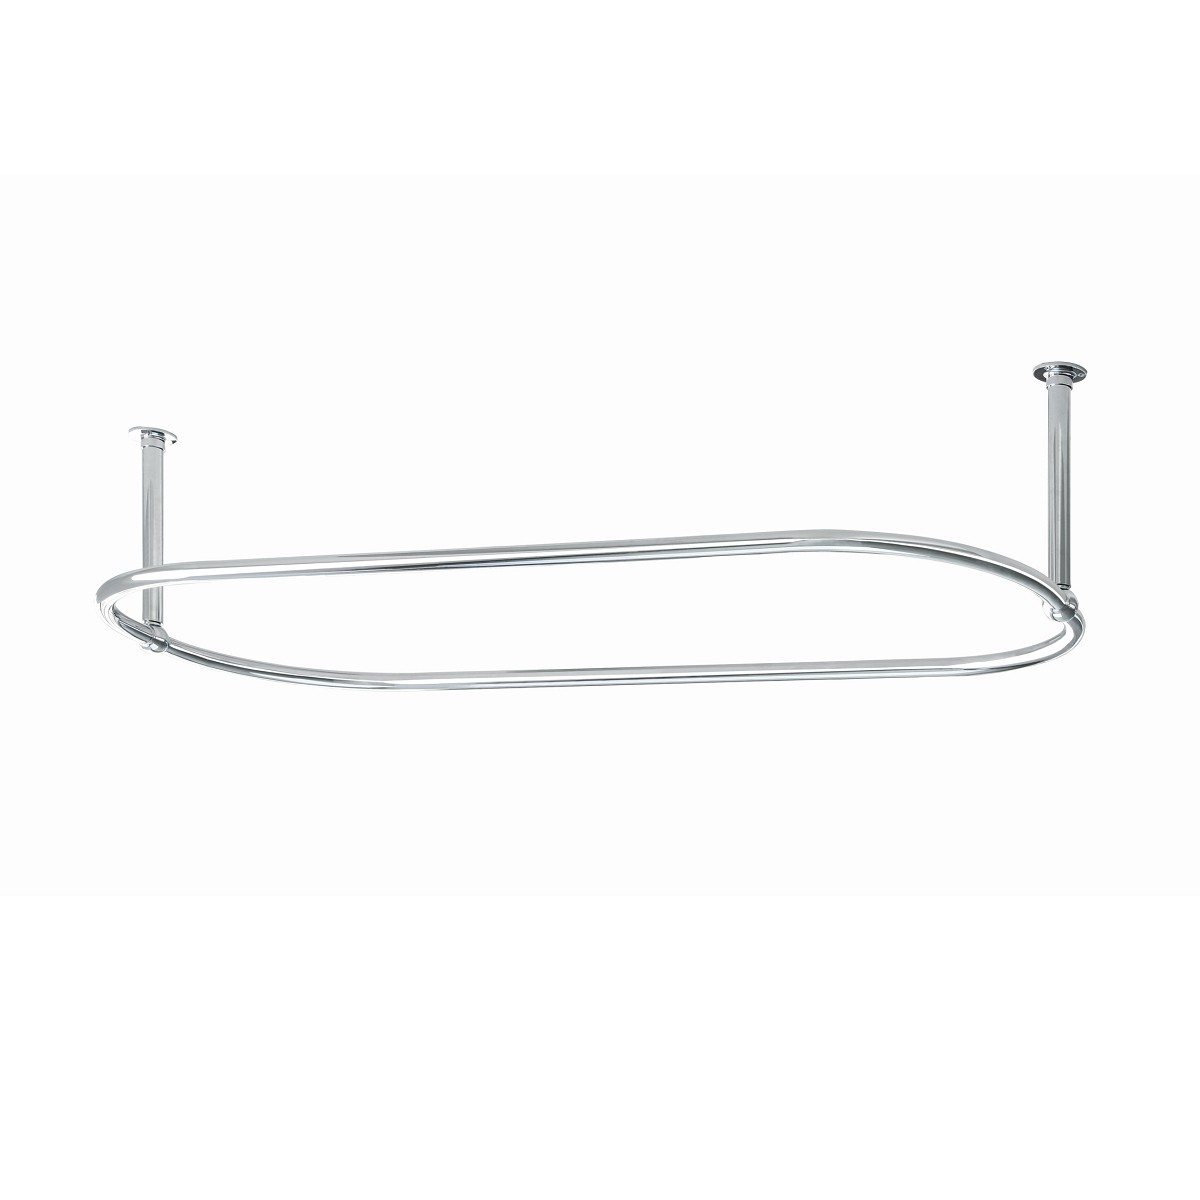 Traditional oval 1500mm x 700mm shower curtain rail